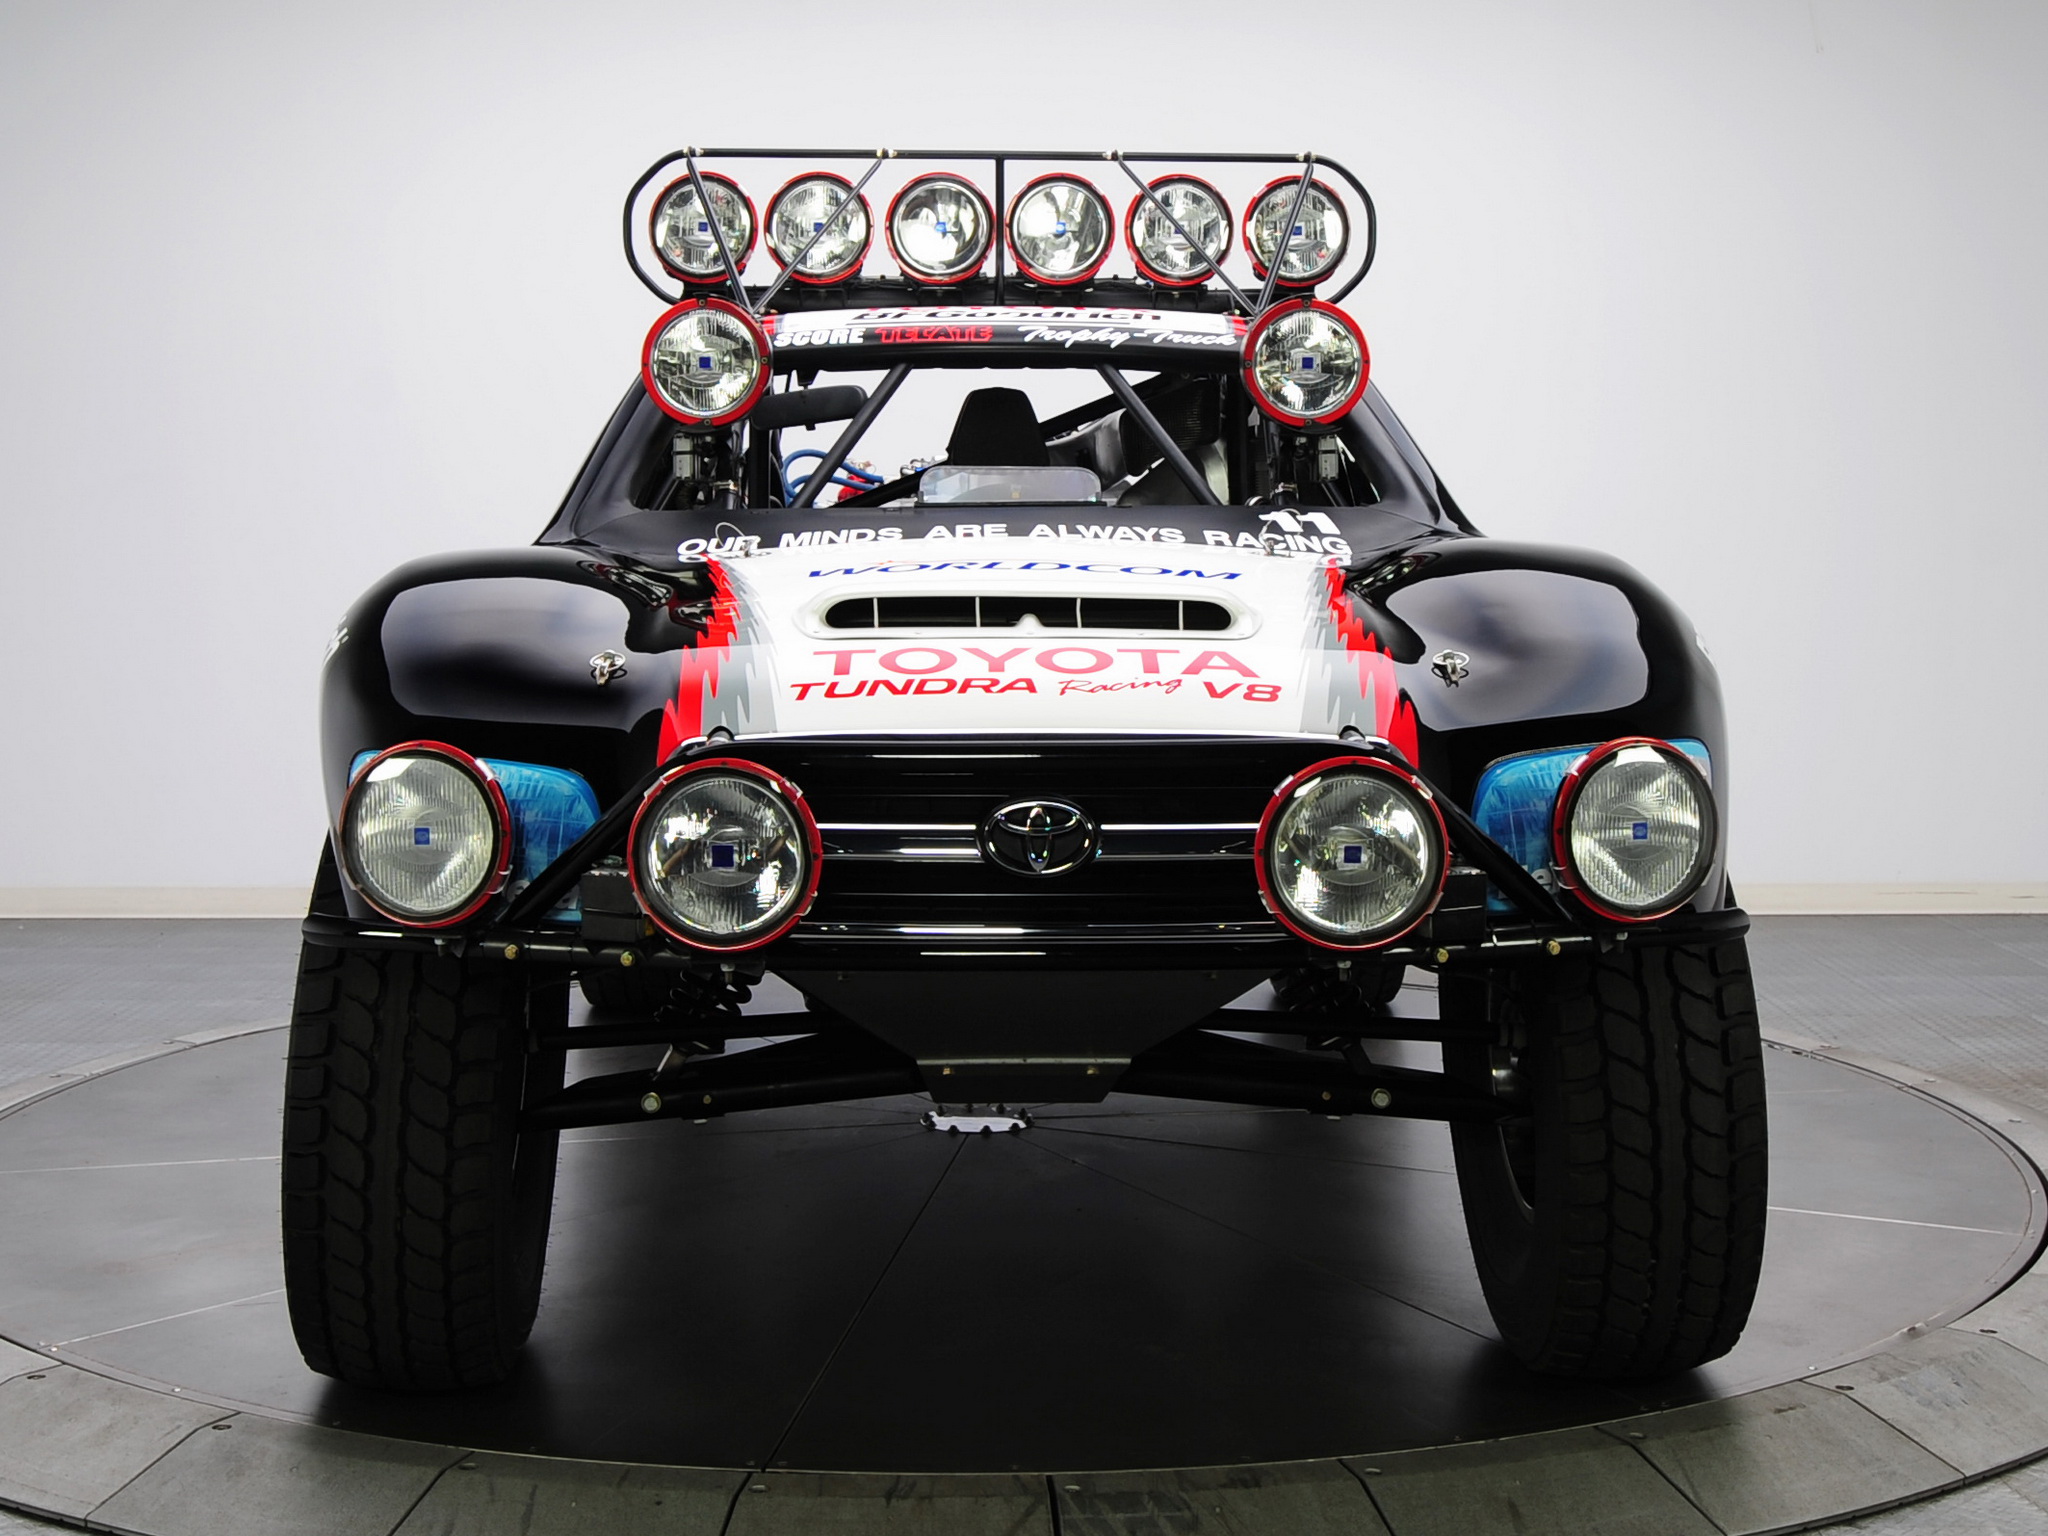 Ppi, Toyota, Trophy, Truck, Race, Racing, Offroad, Pickup Wallpaper HD / Desktop and Mobile Background